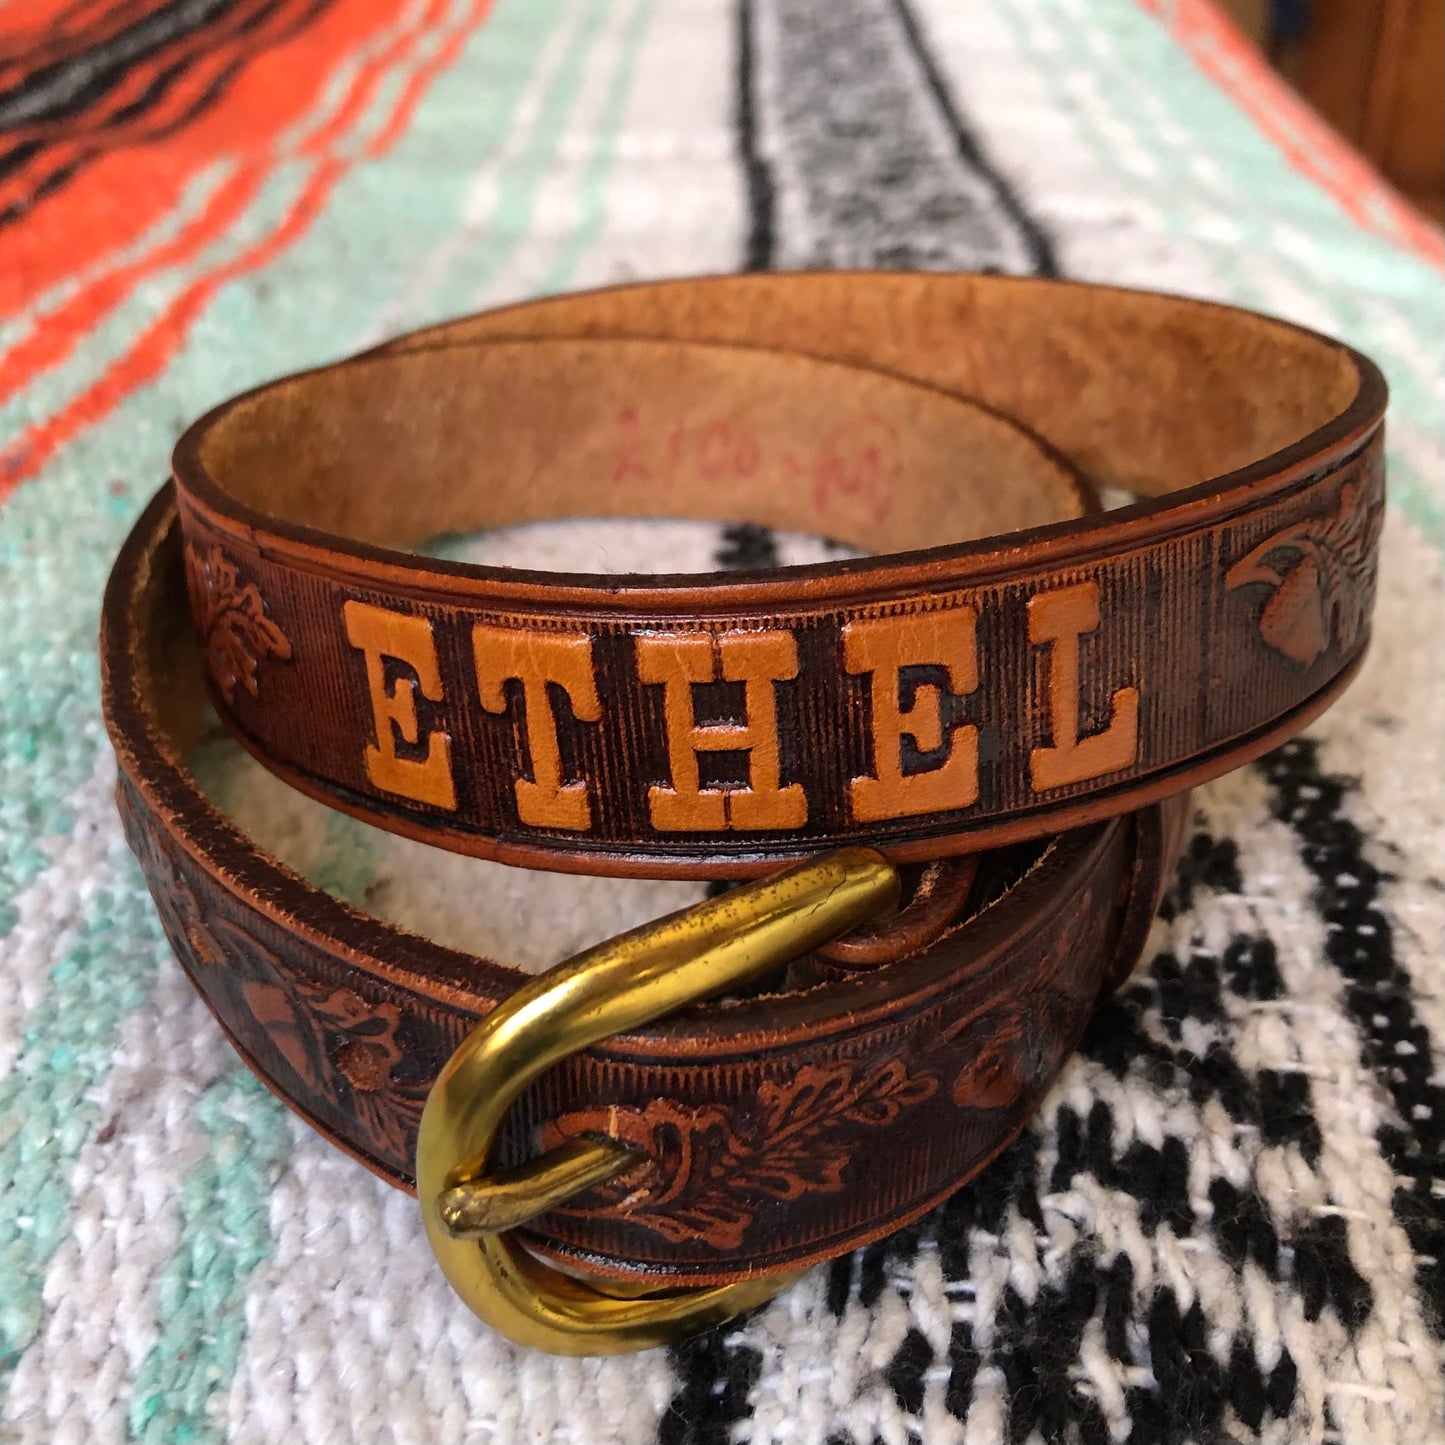 Vintage Western Tooled Leather Belt with “ETHEL” Acorns and Leaves | Made in USA